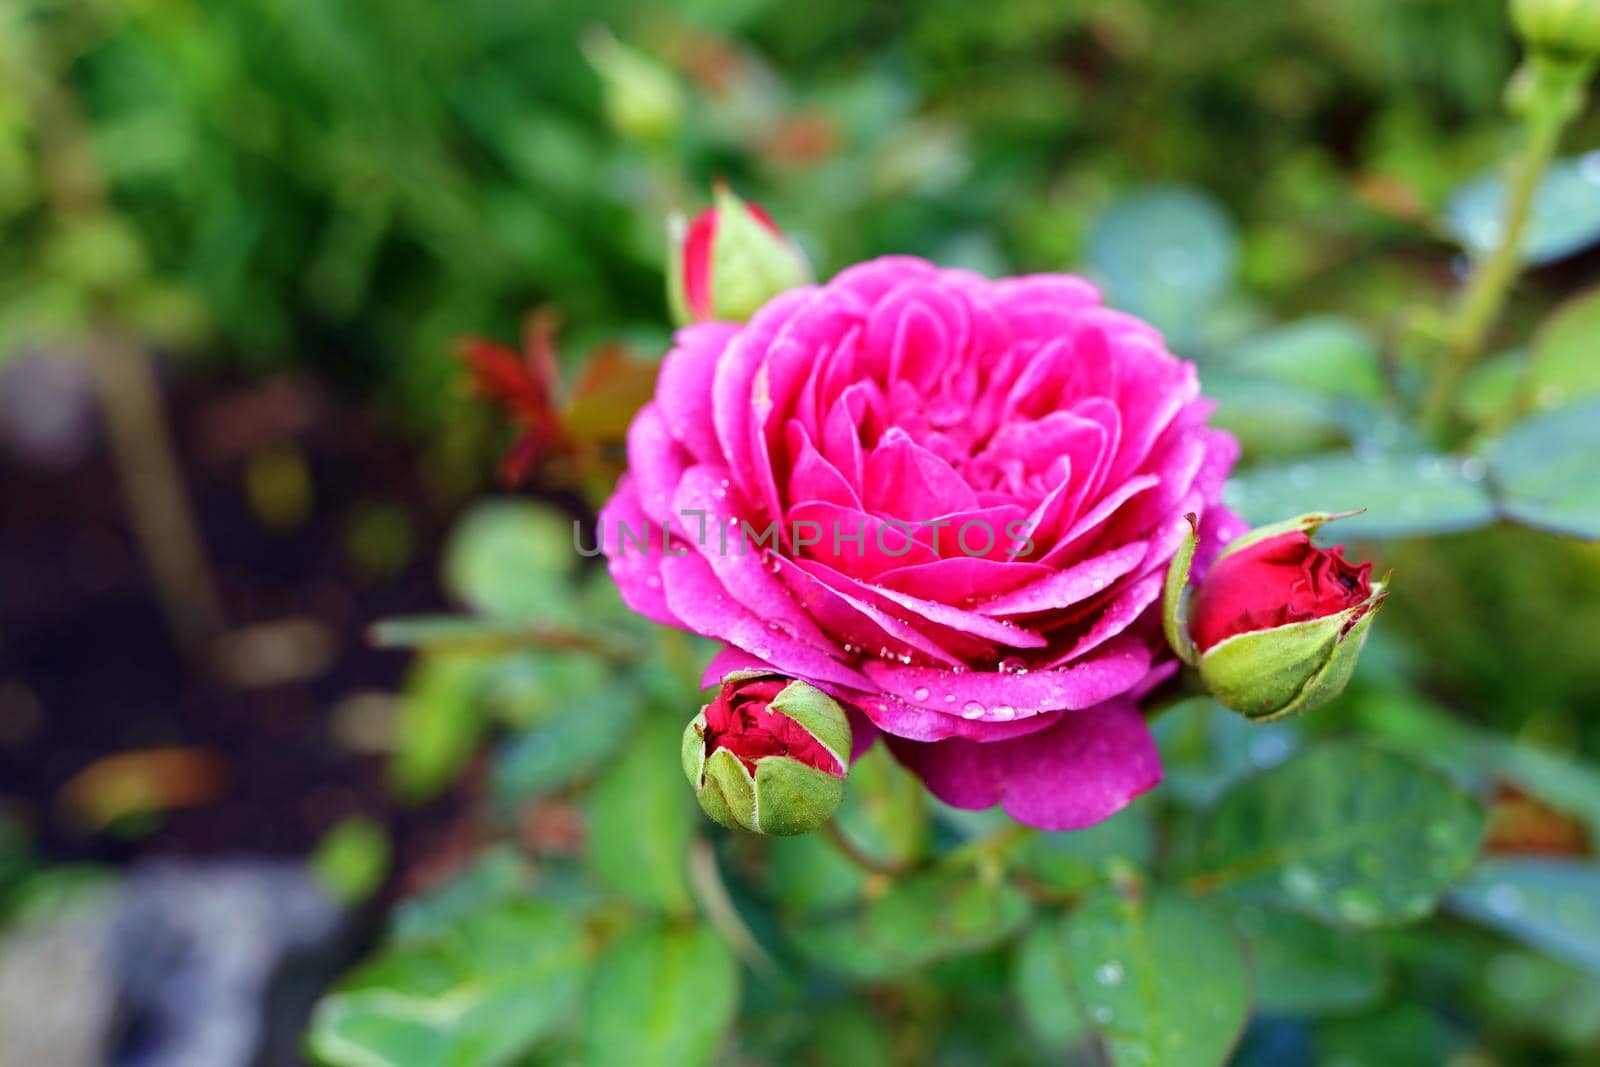 Pink rose with bud in natural green environment outdoors. by clusterx